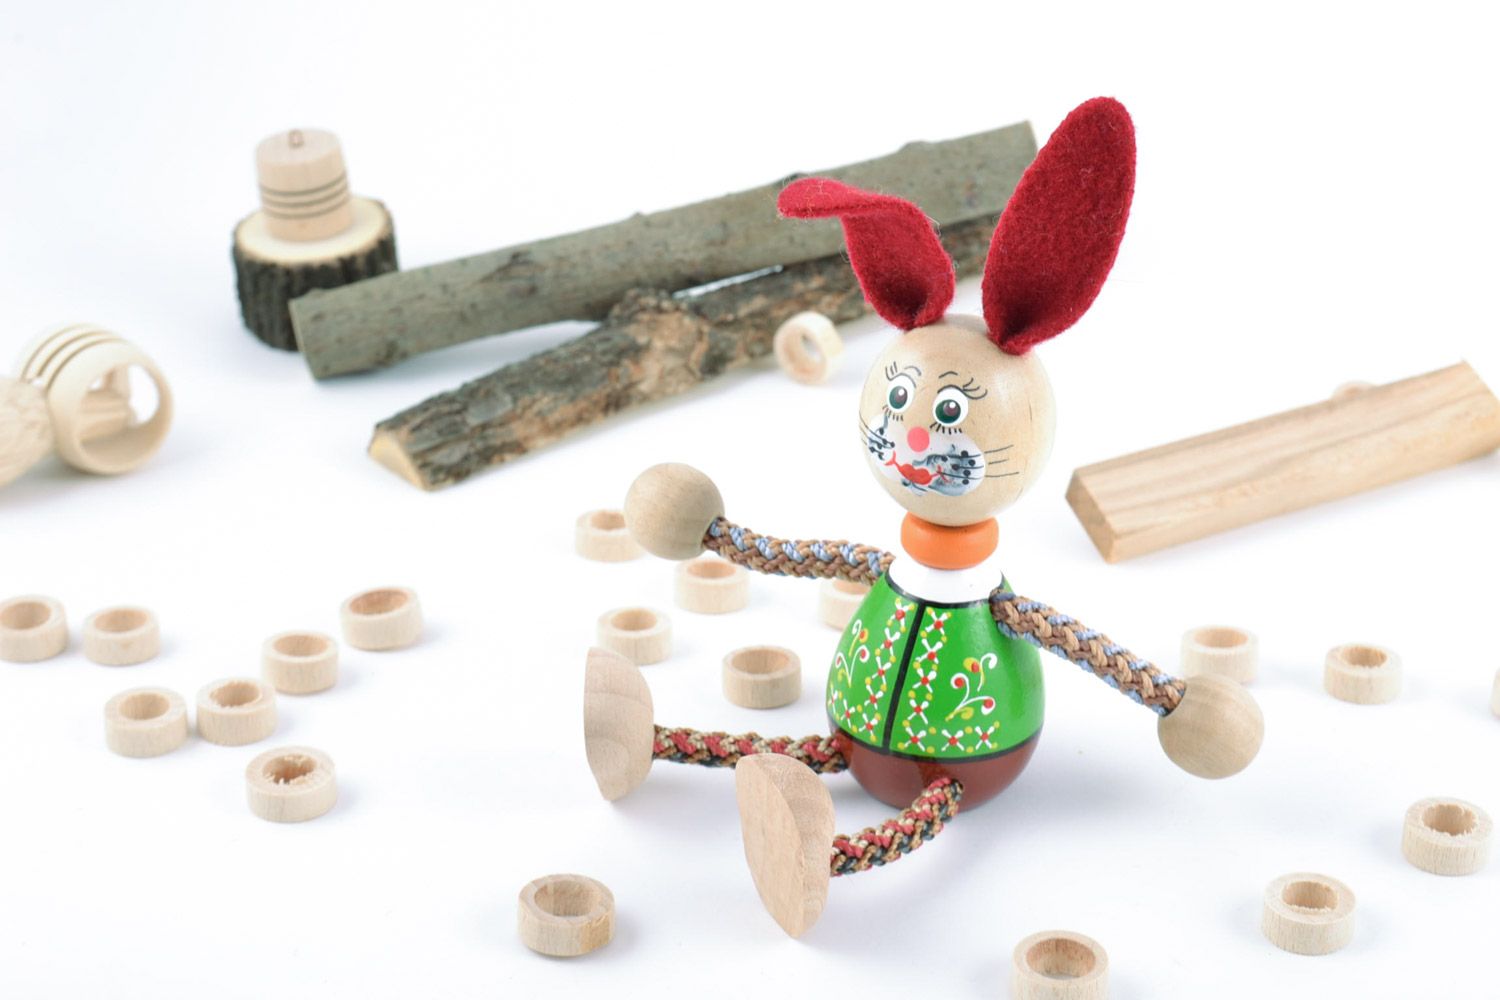 Painted eco friendly wooden homemade eco toy rabbit with red ears for children photo 1